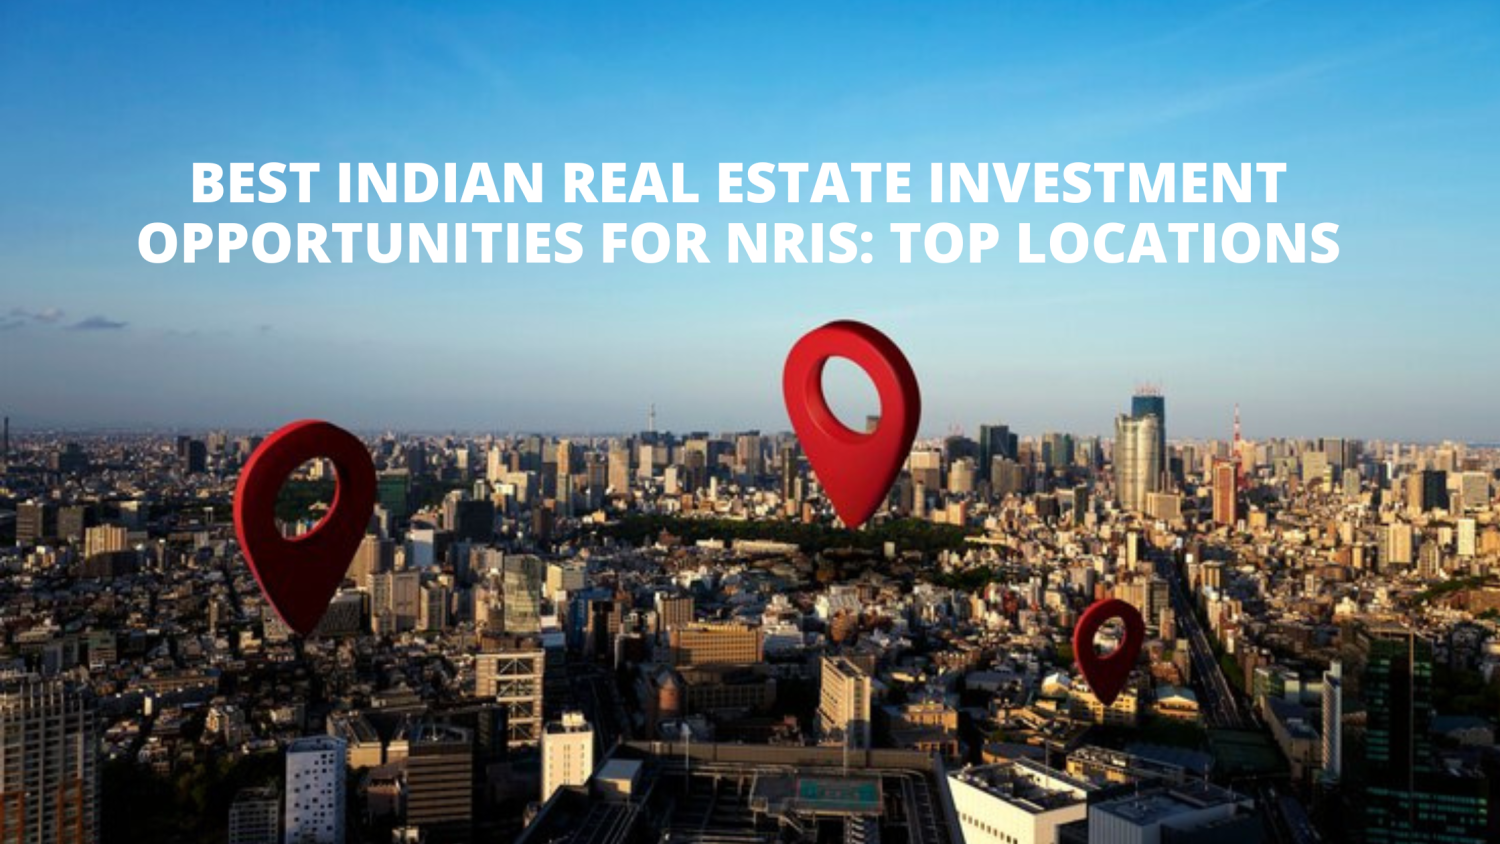 Best Indian Real Estate Investment Opportunities for NRIs: Top Locations